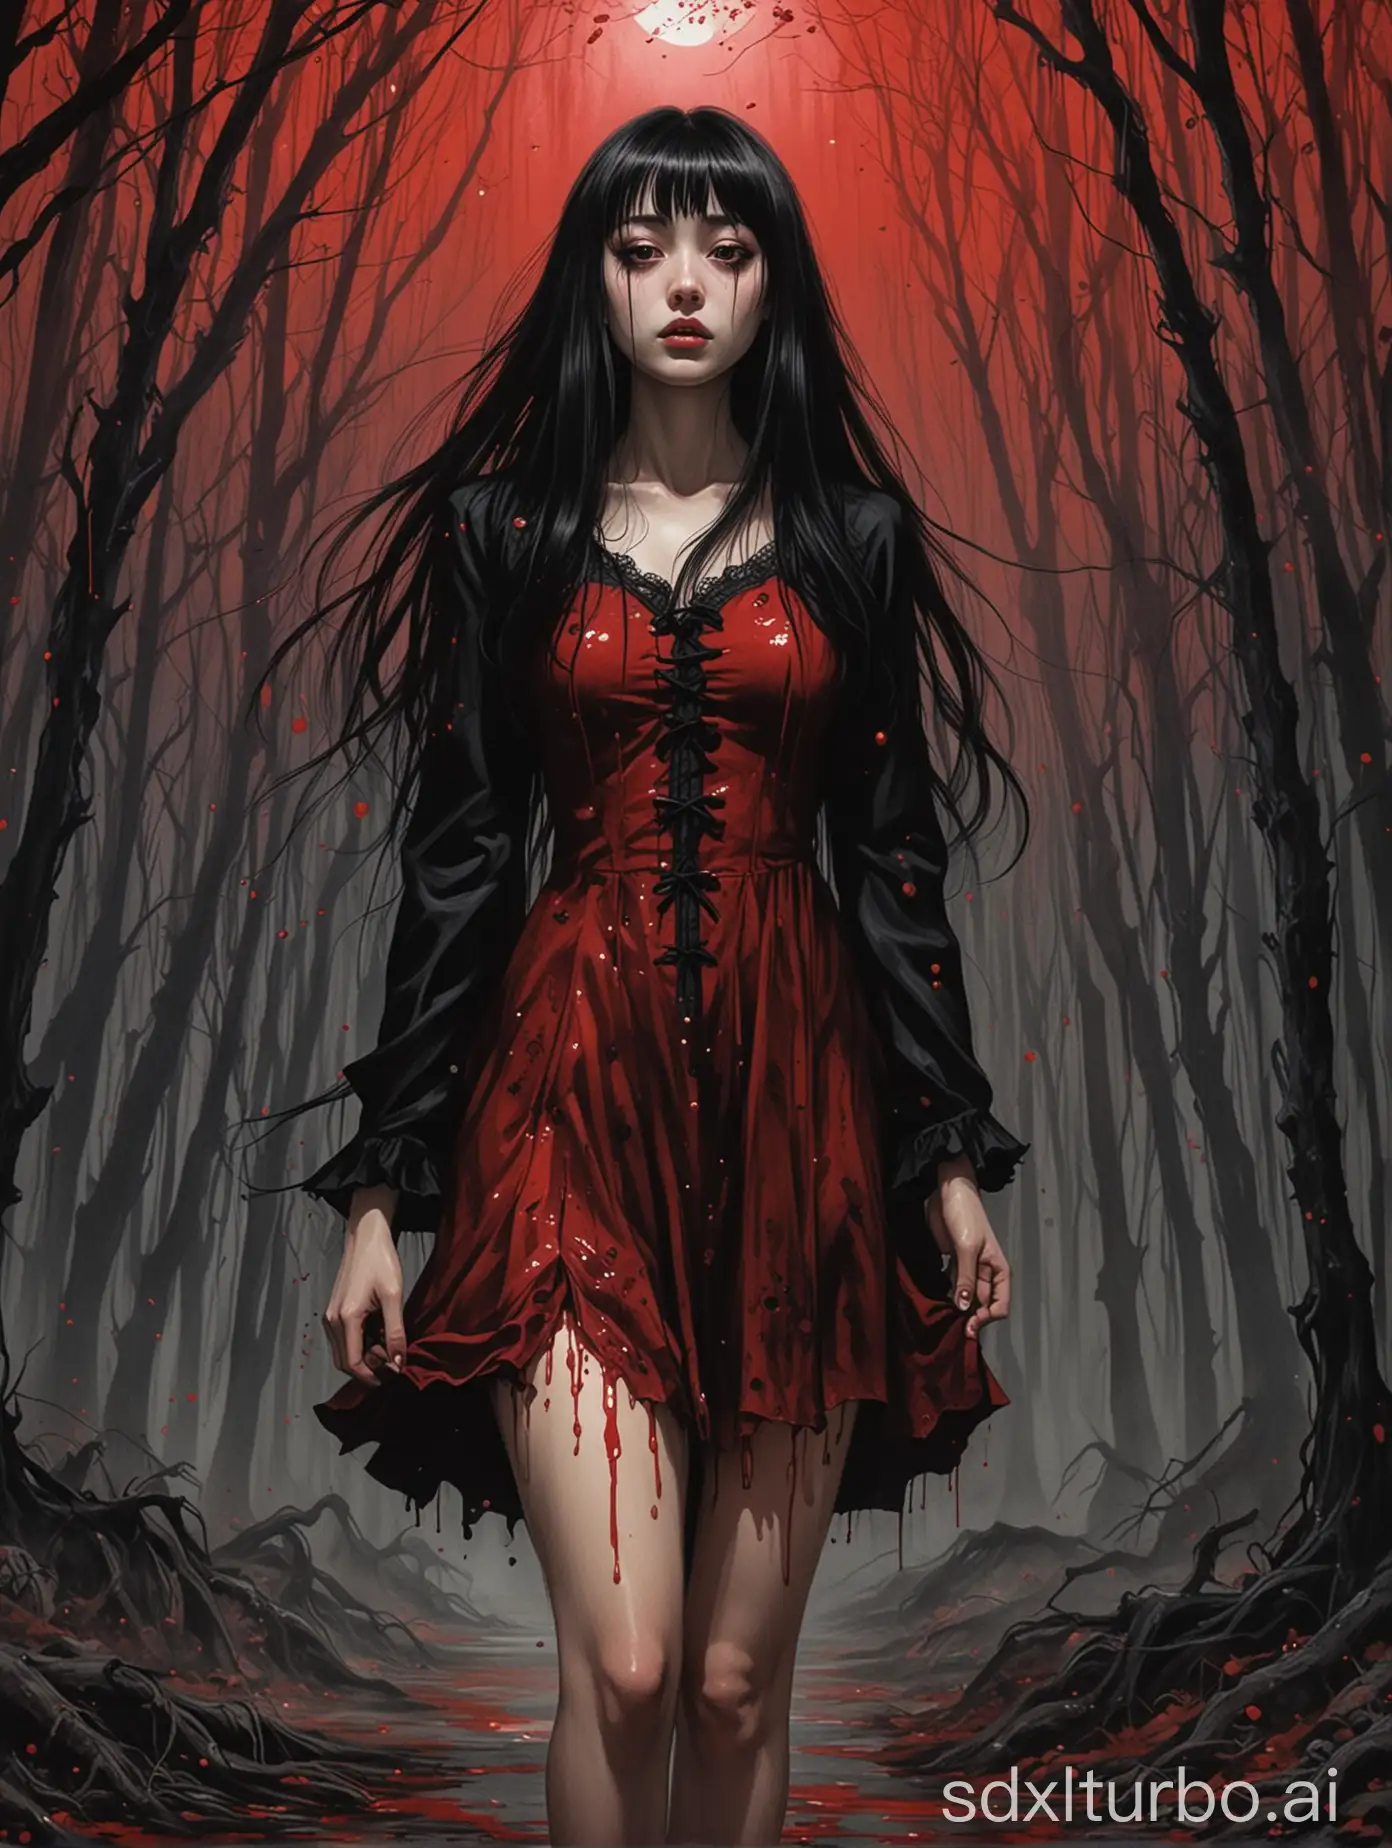 Junji Ito style, inspired horror illustration, one girl, bangs,(dimples), the woman's pale face contrasting sharply with her long jet-black hair that hangs over her shoulders. She wears a form-fitting red and black dress,
A macabre mass of blood and flesh falls at the woman's feet,
Her eyes wide with a mixture of fear and determination, she has a bewitching presence as she moves through the surreal landscape with an eerie calm.